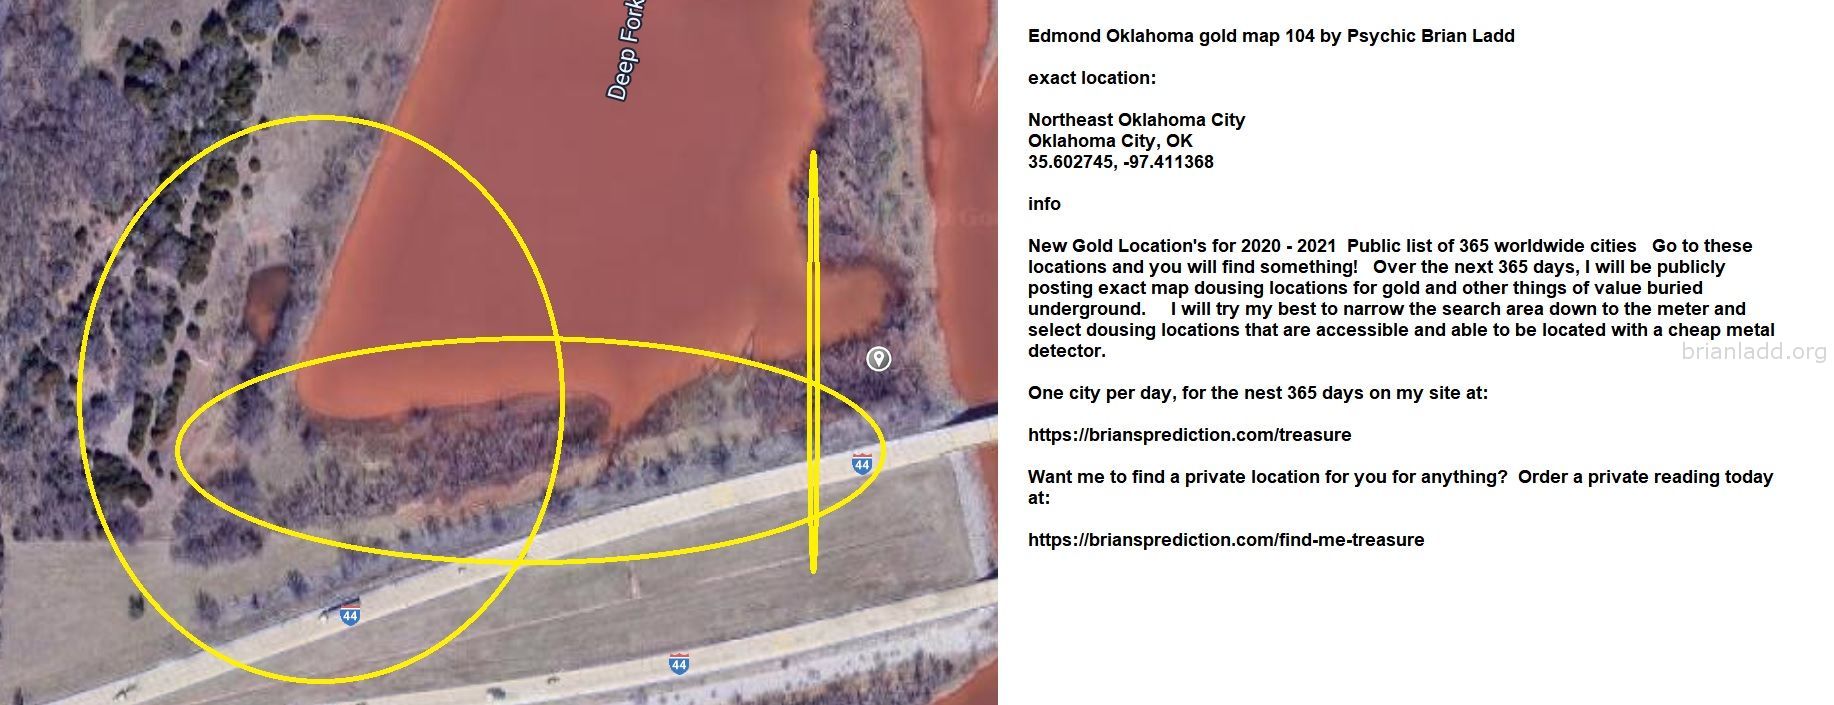 Edmond Oklahoma gold map 104 by Psychic Brian Ladd
New Gold Location's for 2020 - 2021  Public list of 365 worldwide cities   Go to these locations and you will find something!   Over the next 365 days, I will be publicly posting exact map dousing locations for gold and other things of value buried underground.     I will try my best to narrow the search area down to the meter and select dousing locations that are accessible and able to be located with a cheap metal detector. One city per day, for the nest 365 days on my site at:  https://briansprediction.com/treasure  Want me to find a private location for you for anything?  Order a private reading today at:  https://briansprediction.com/find-me-treasure
